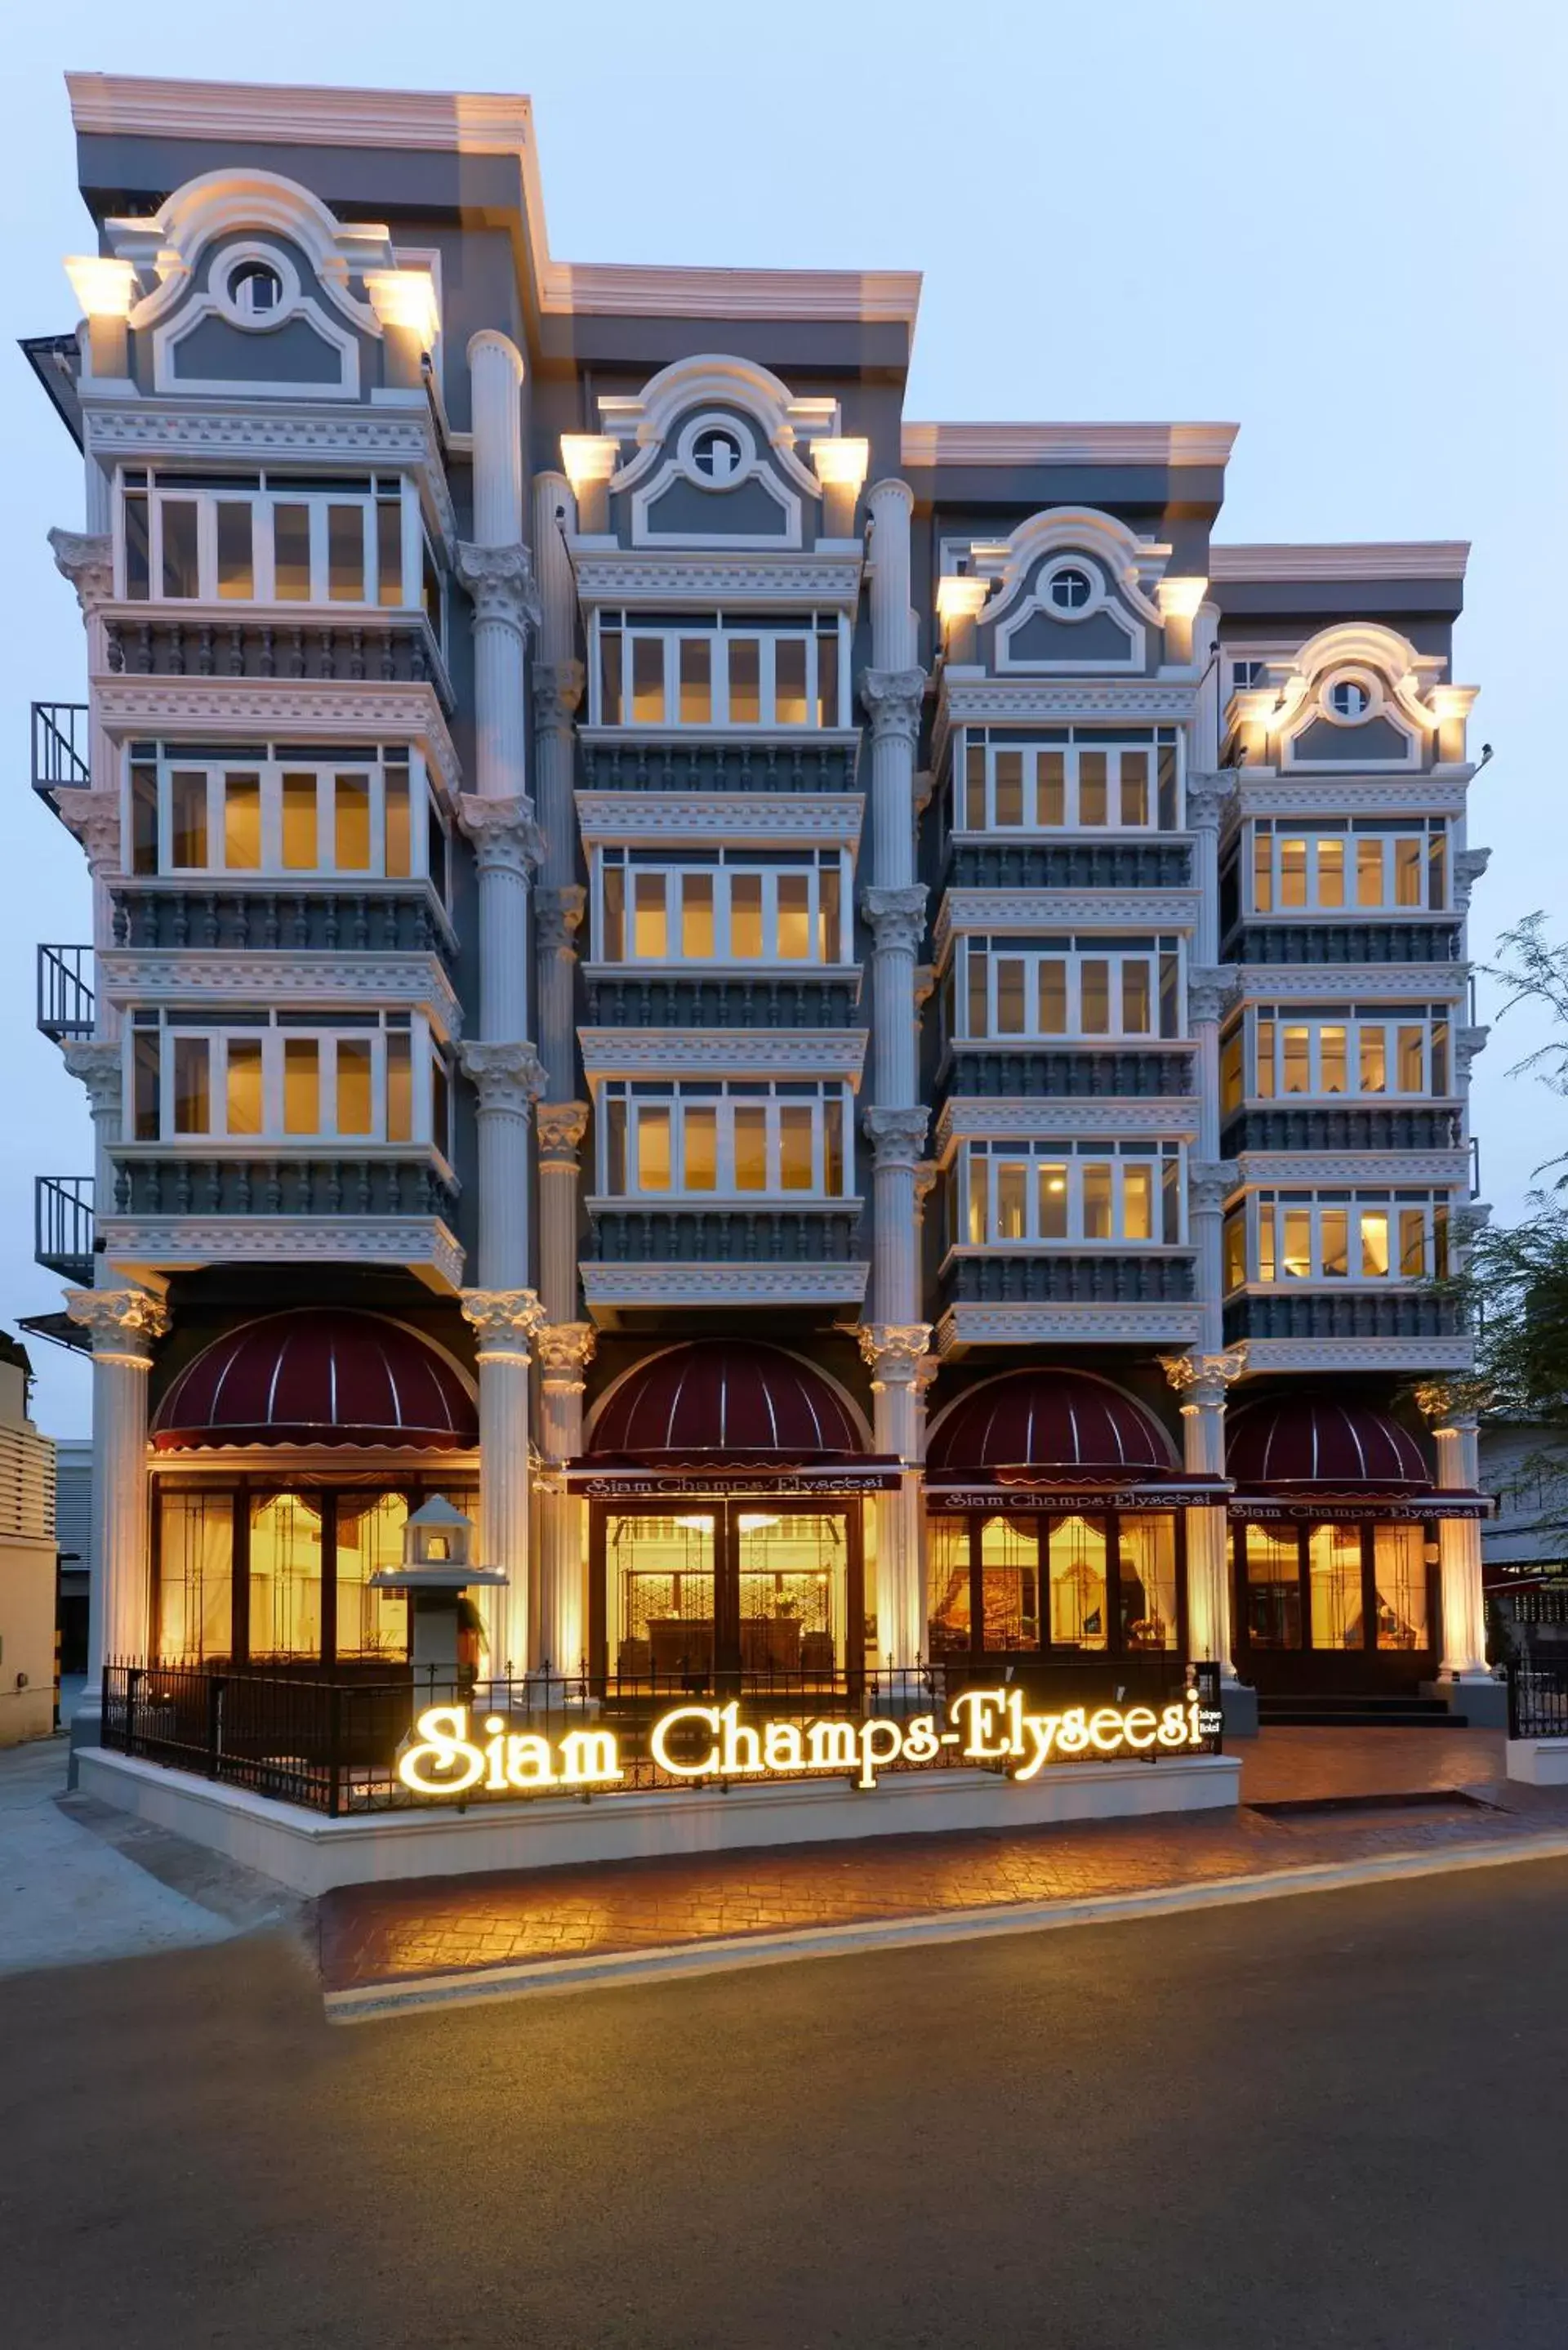 Property Building in Siam Champs Elyseesi Unique Hotel